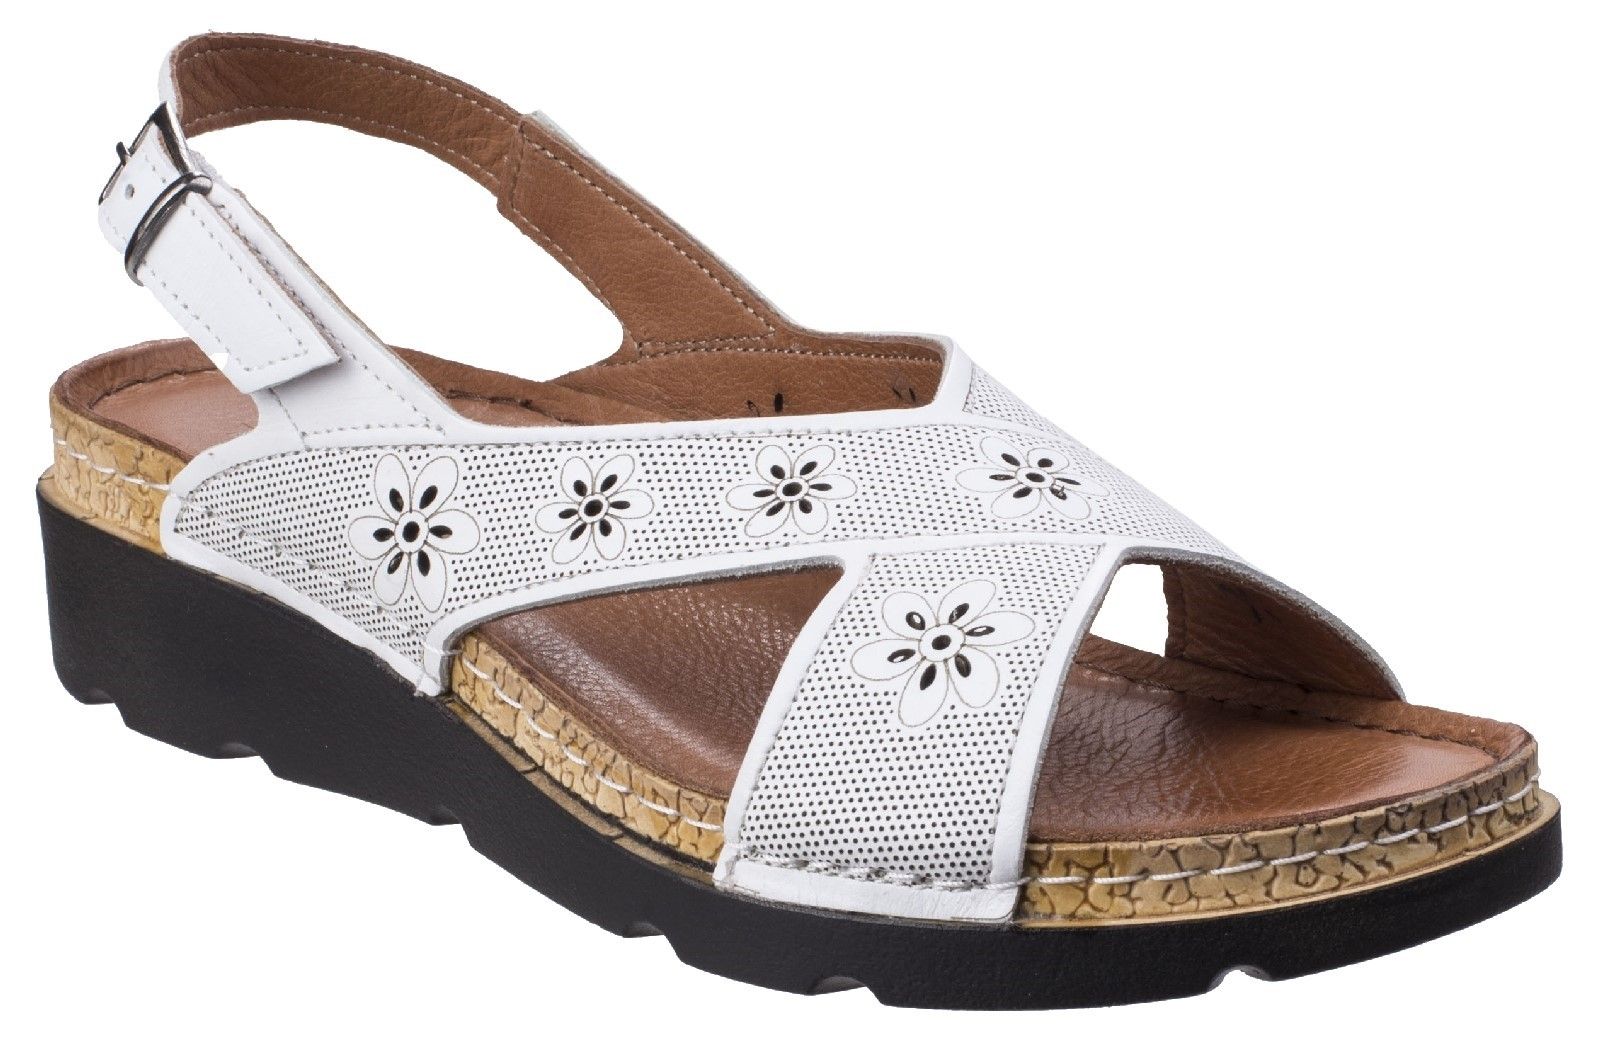 Stylish and comfortable wedge sandal from Italian inspired brand Riva. The attention is in the detail with floral decorations and supple leather uppers showcased on a sporty-look platform wedge. Soft and supple leather uppers. 
Perforated floral details and patterns. 
Criss-cross open toe design. 
Sling back strap with buckle closure. 
Anatomically designed cushioned leather foot bed.